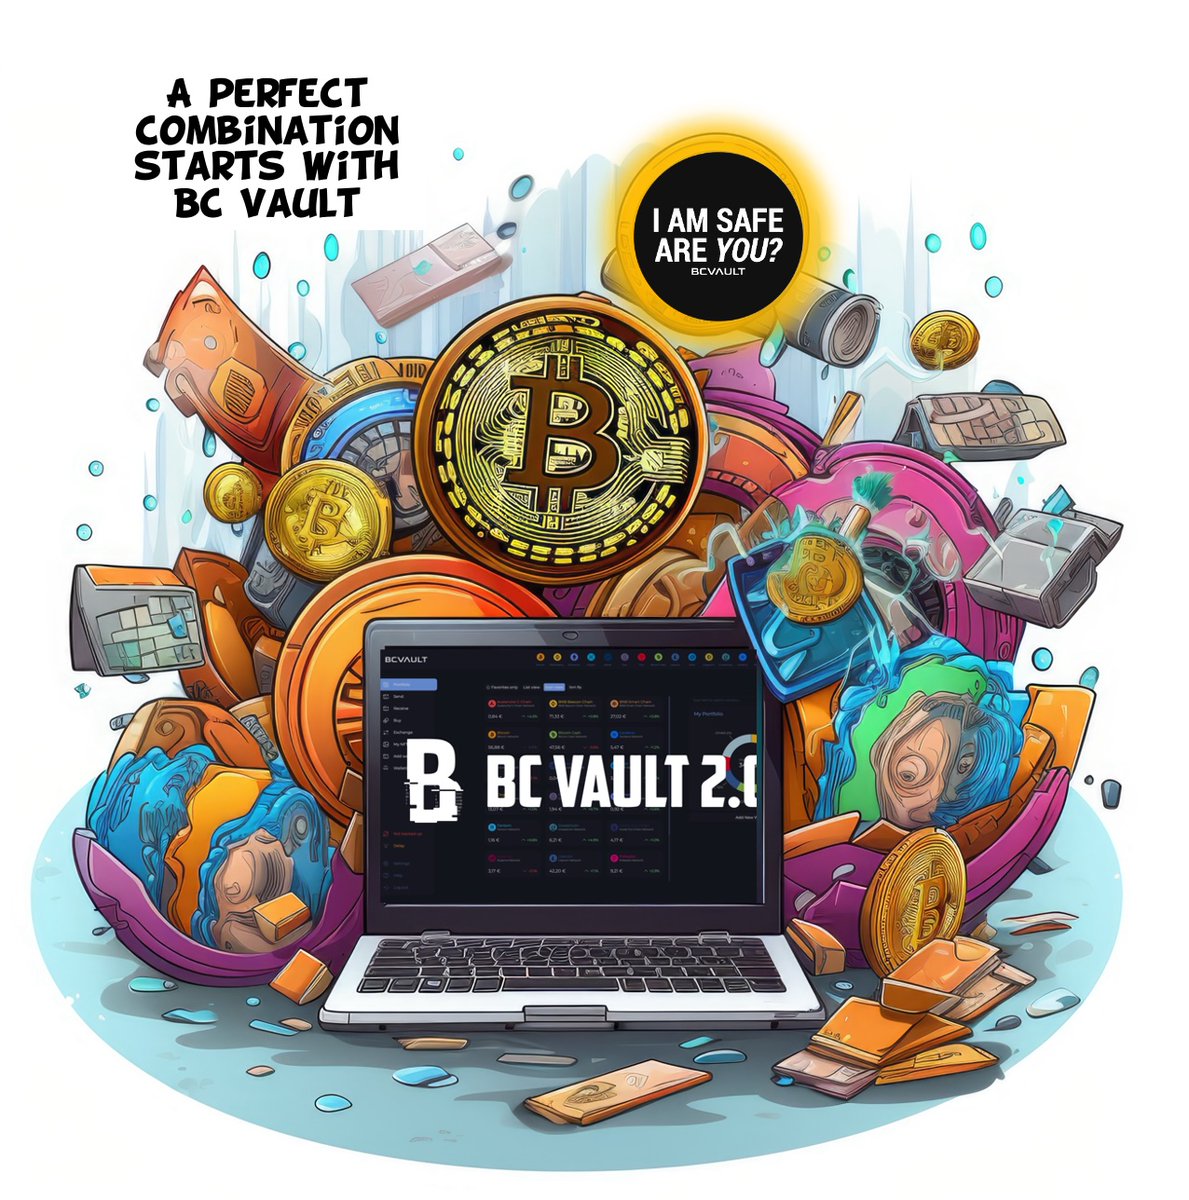 🚀 BC Vault's exclusive features:

- Supports millions of coins & tokens, outperforming competitors like Ledger and Trezor.
- Seedless Cold Storage for enhanced security.
- Ferroelectric RAM chip lasting over 200 years, ideal for multi-generational use.
- True random number